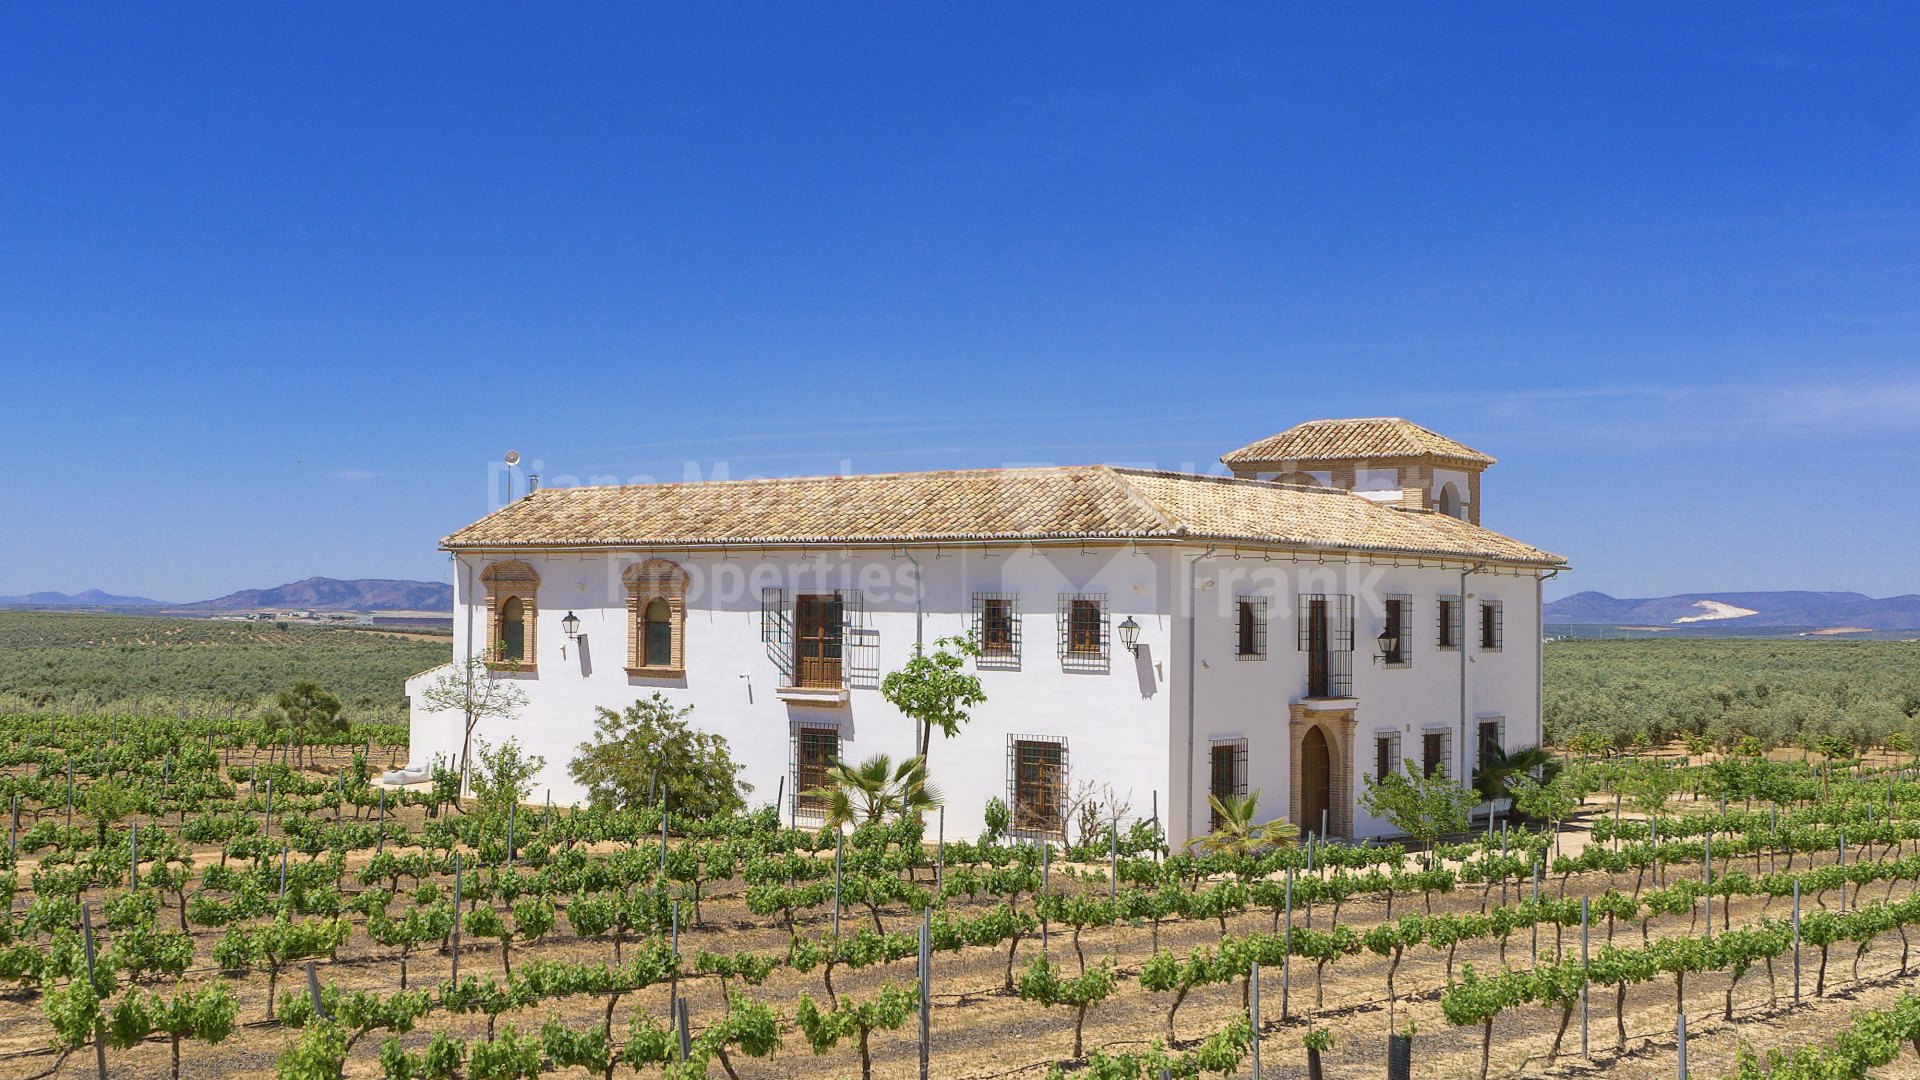 A countryside hotel in Antequera with vineyards, swimming pool, and beautiful views.